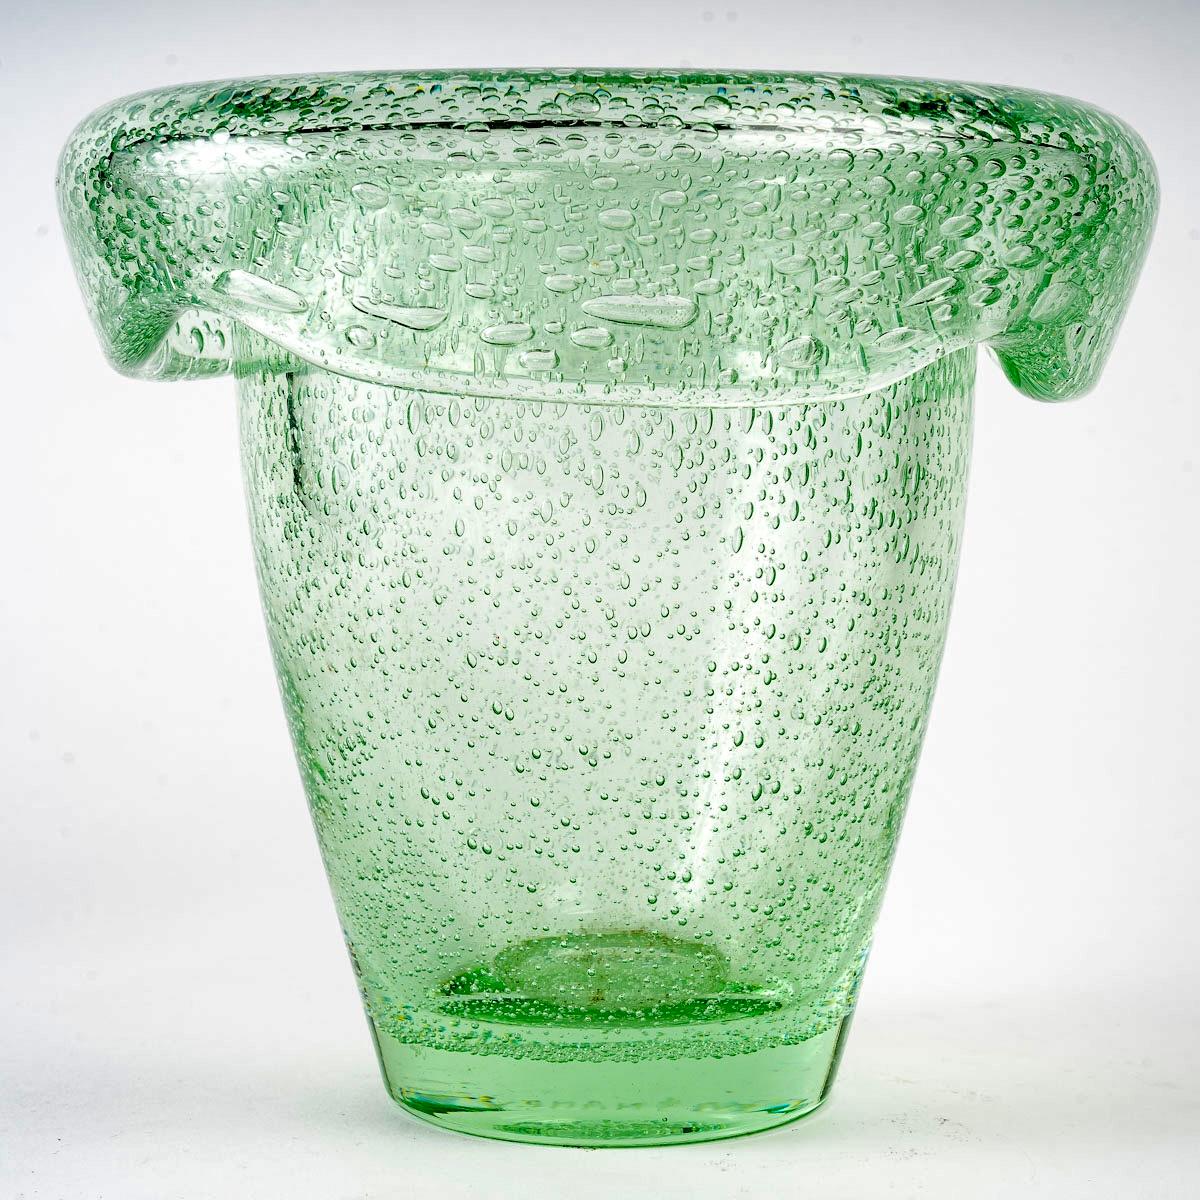 Vase made in green bubbled glass with upturned rim by Daum Nancy.
Engraved signature on base.

Perfect condition. 
Very impressive model with work on rim.

Measures: height: 25 cm
diameter at rim: 27 cm.